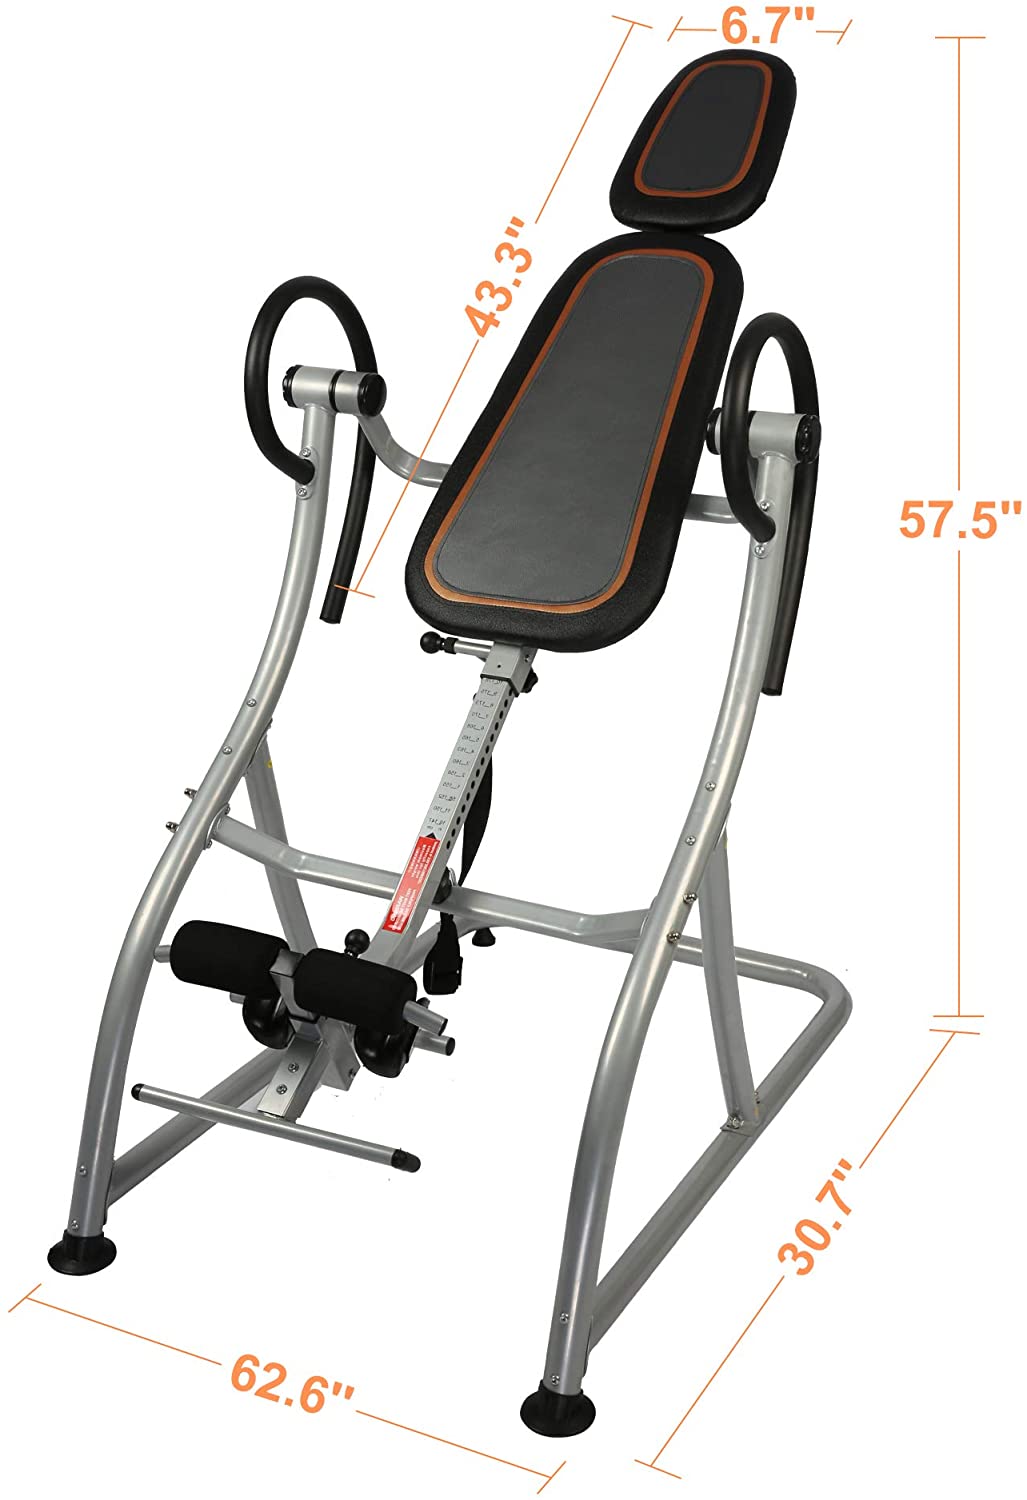 Heavy Duty Inversion Table 58-78 Inches Adjustable Pain Therapy Training with Protective Belt Support up to 330LBS